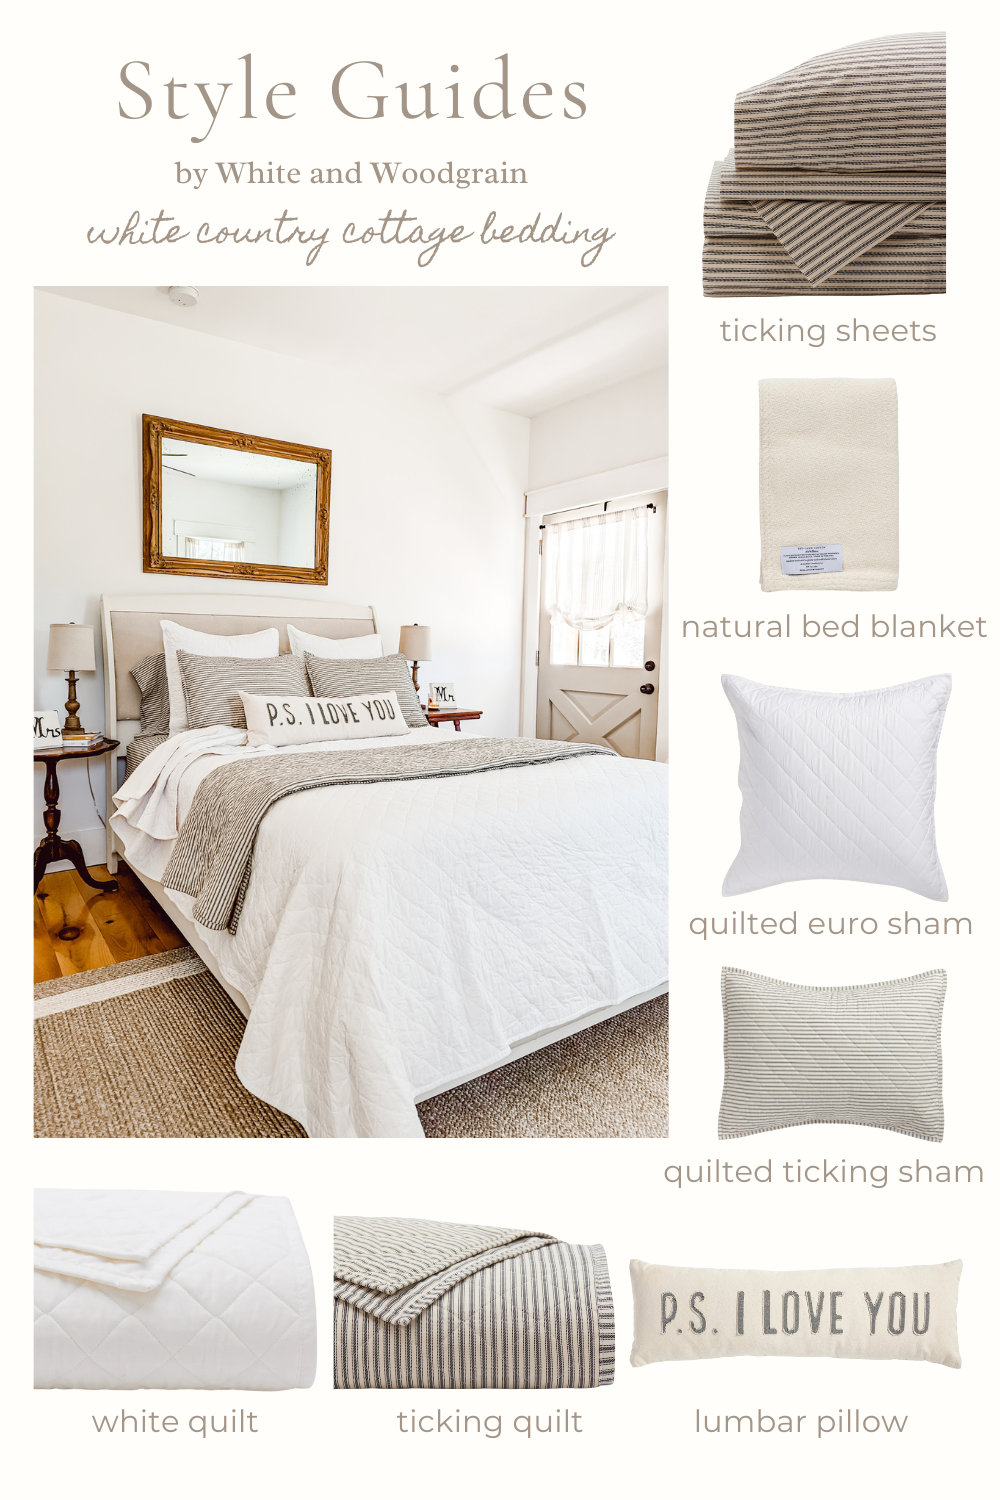 style guide that shows you how to layer and style your white country cottage bedding like a designer